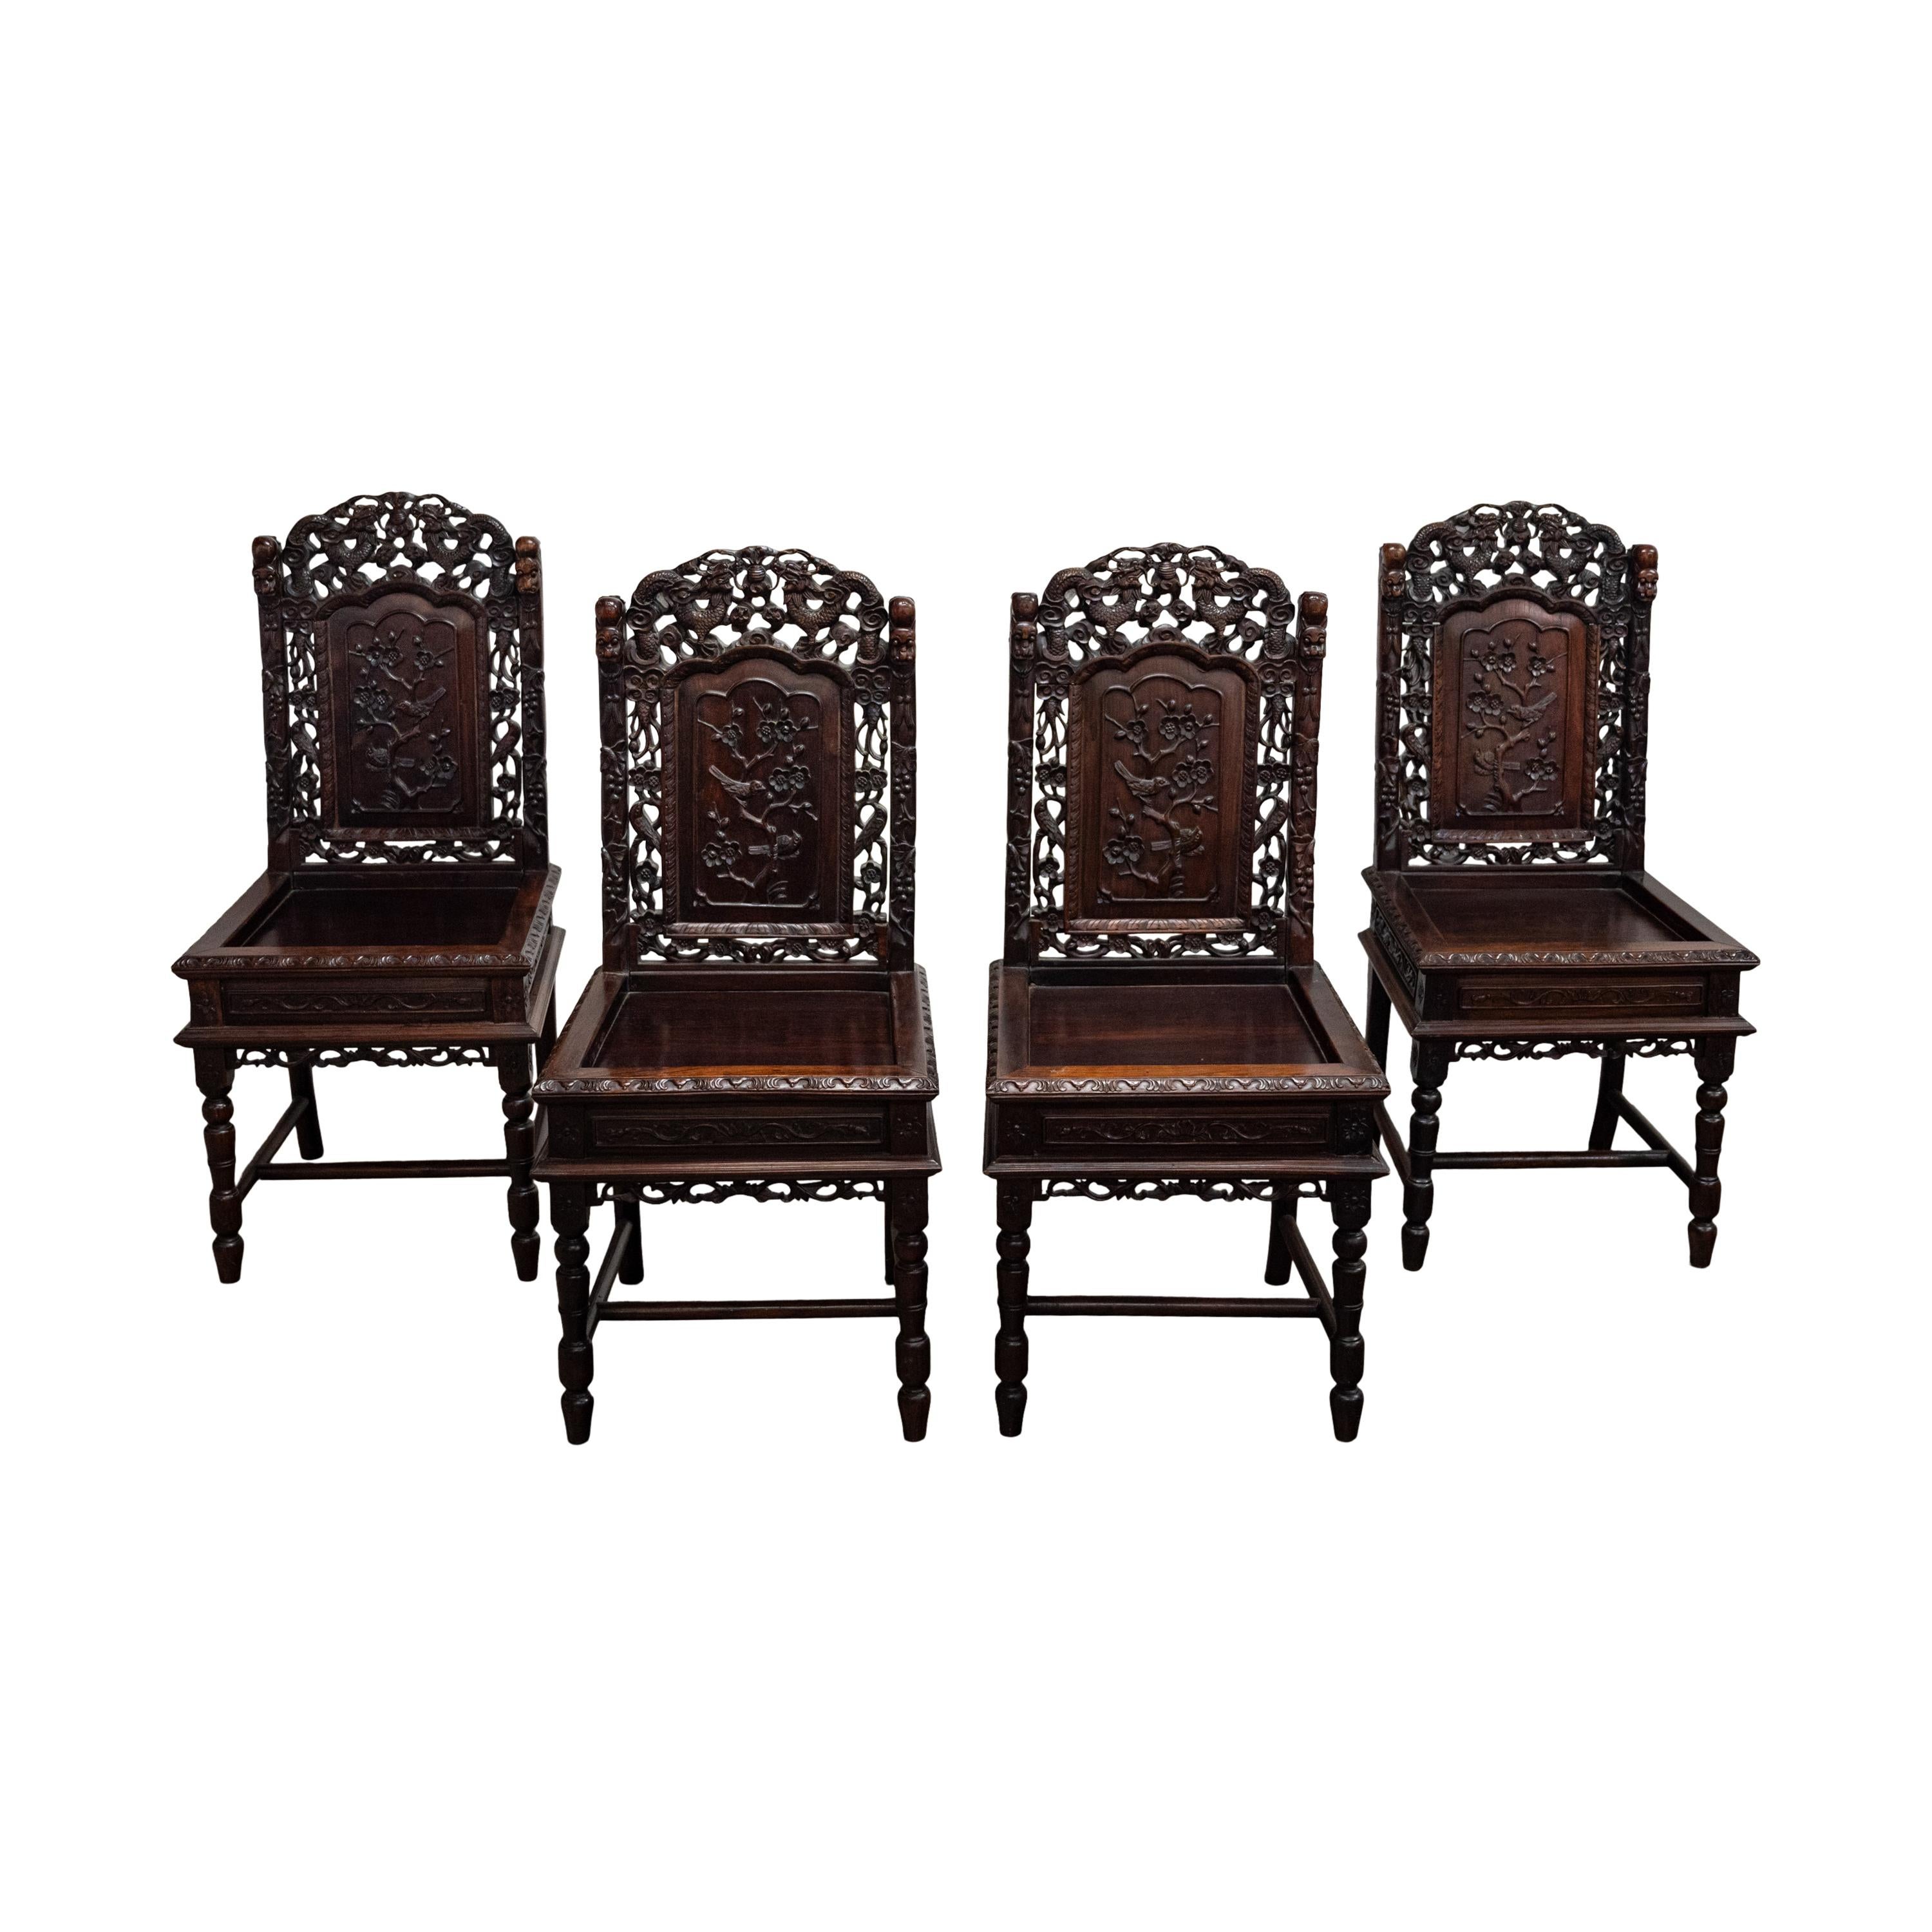 Four Antique Qing Dynasty Chinese Carved Rosewood Side Dining Dragon Chairs 1880 For Sale 4